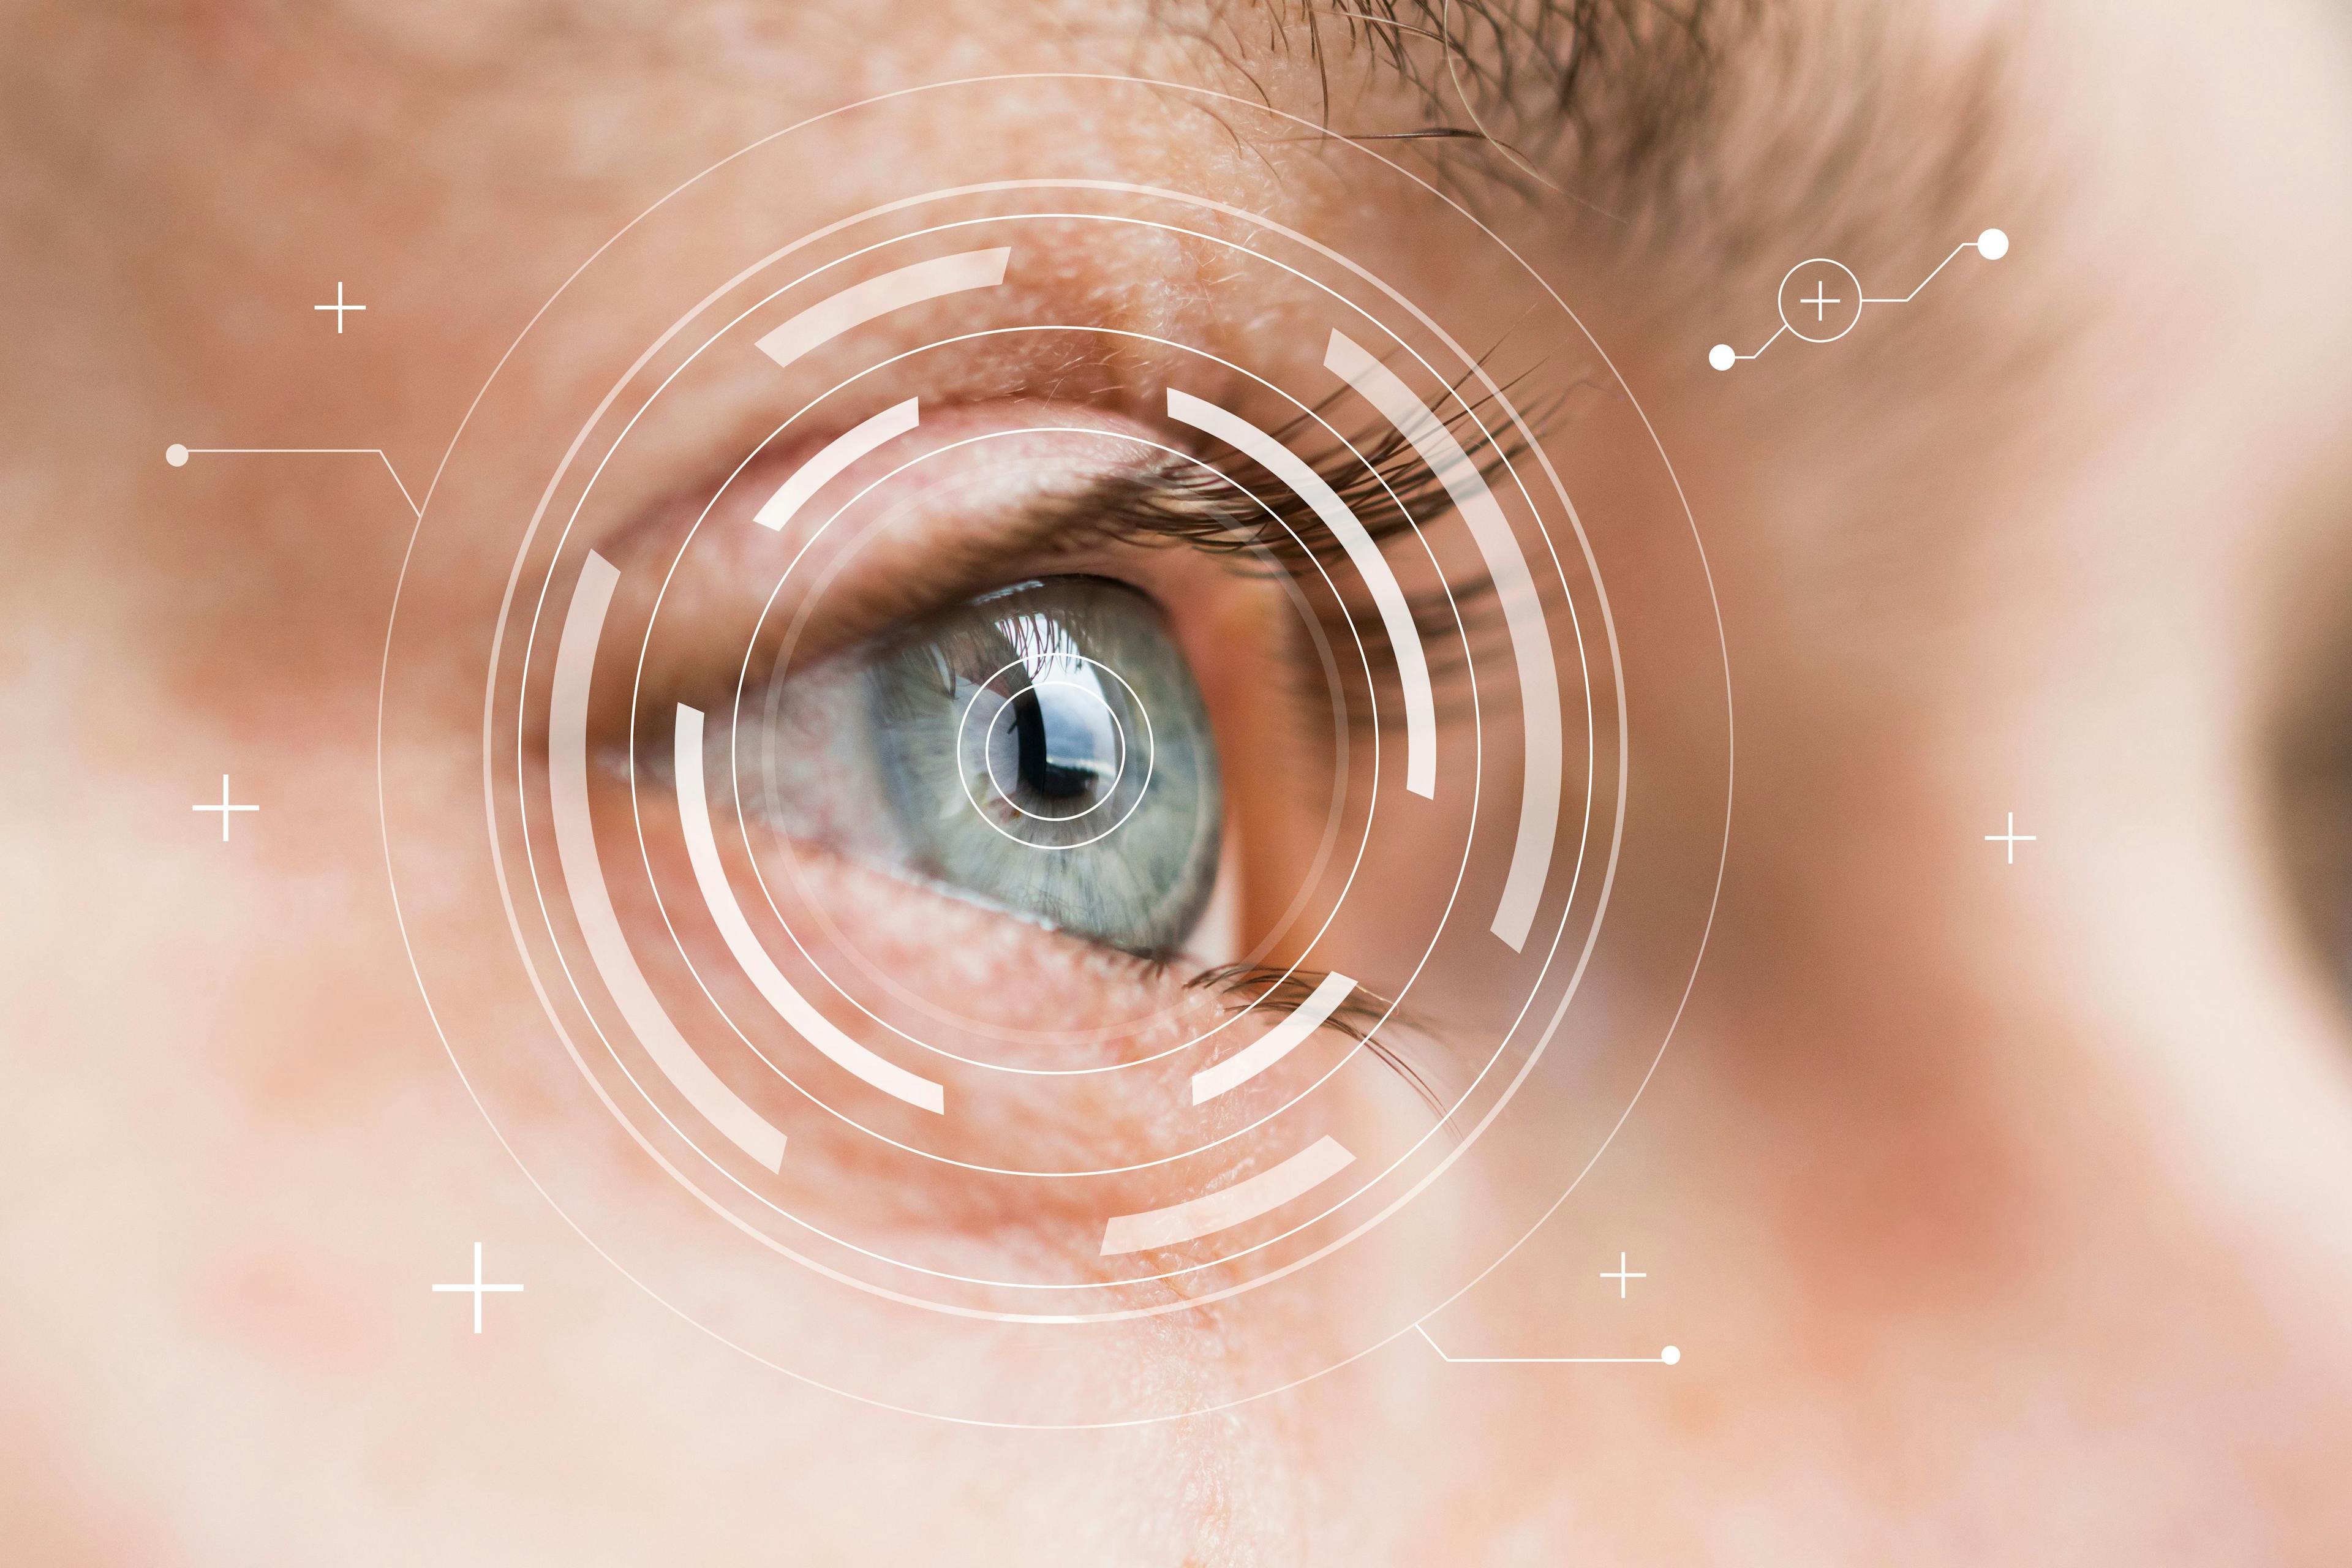 The AI system expands the availability of vision-saving eye screenings by making automated AI diagnosis and coordination of care possible in primary care medical practices without the need for a specialist’s review. (Adobe Stock image)